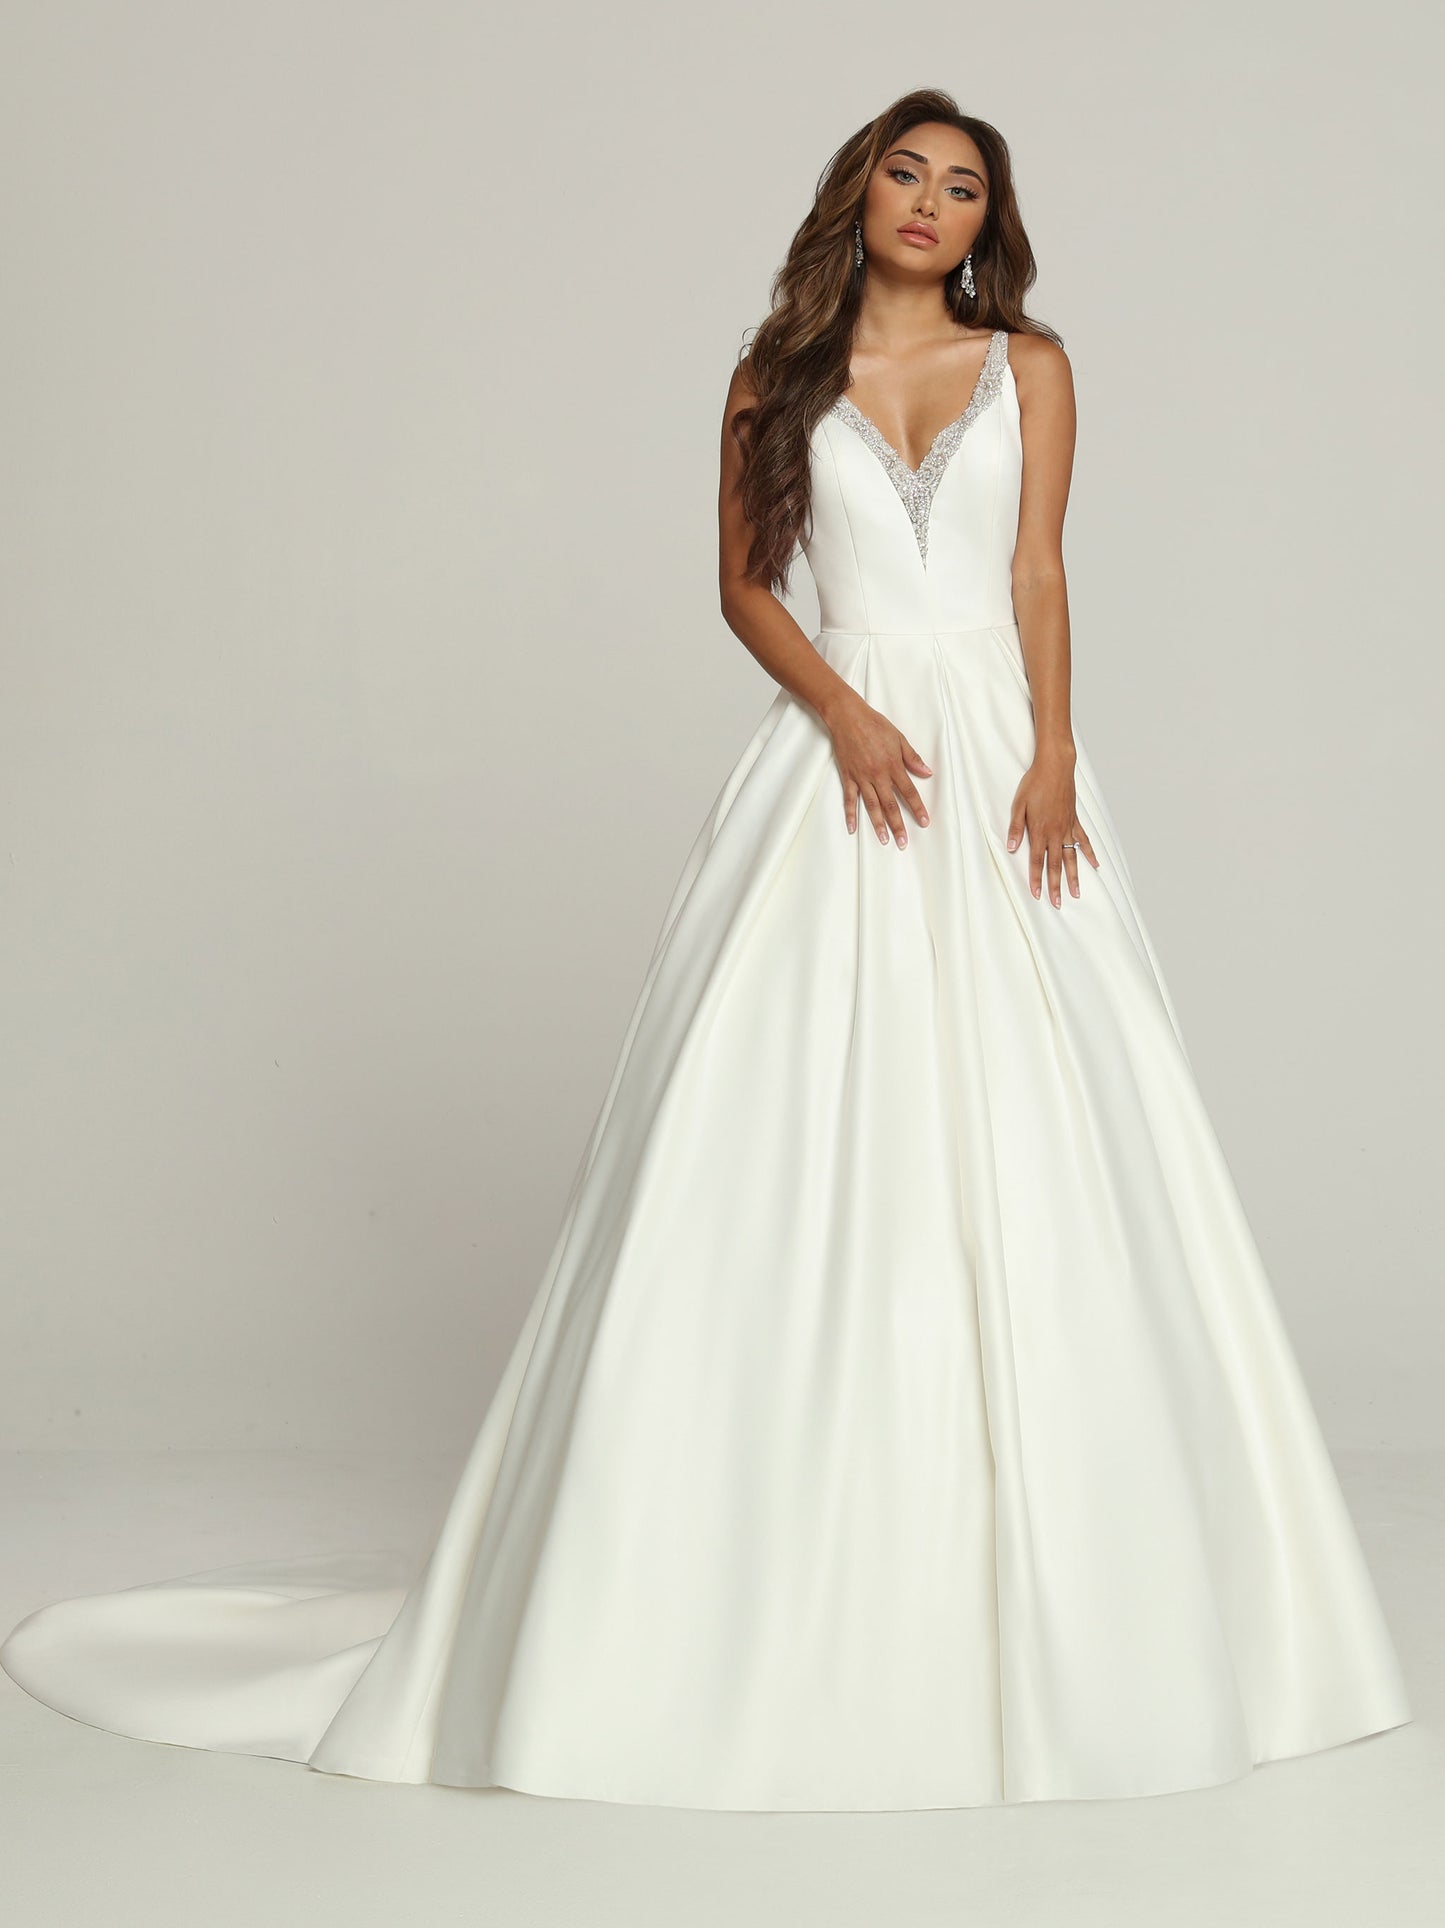 Davinci Bridal 50690 Satin A Line Ballgown Wedding Dress Sheer Rhinestone V Neck Bridal Gown Modern Details make this Satin A-Line Ball Gown Wedding Dress a Classic. The Tailored Bodice features a Plunging V-Neckline & Low Scoop Back. Beaded Applique Accents the Neckline, Straps & Sheer Back with its Covered Button Accents. The Generous Inverted Pleat Skirt has a Chapel Train.